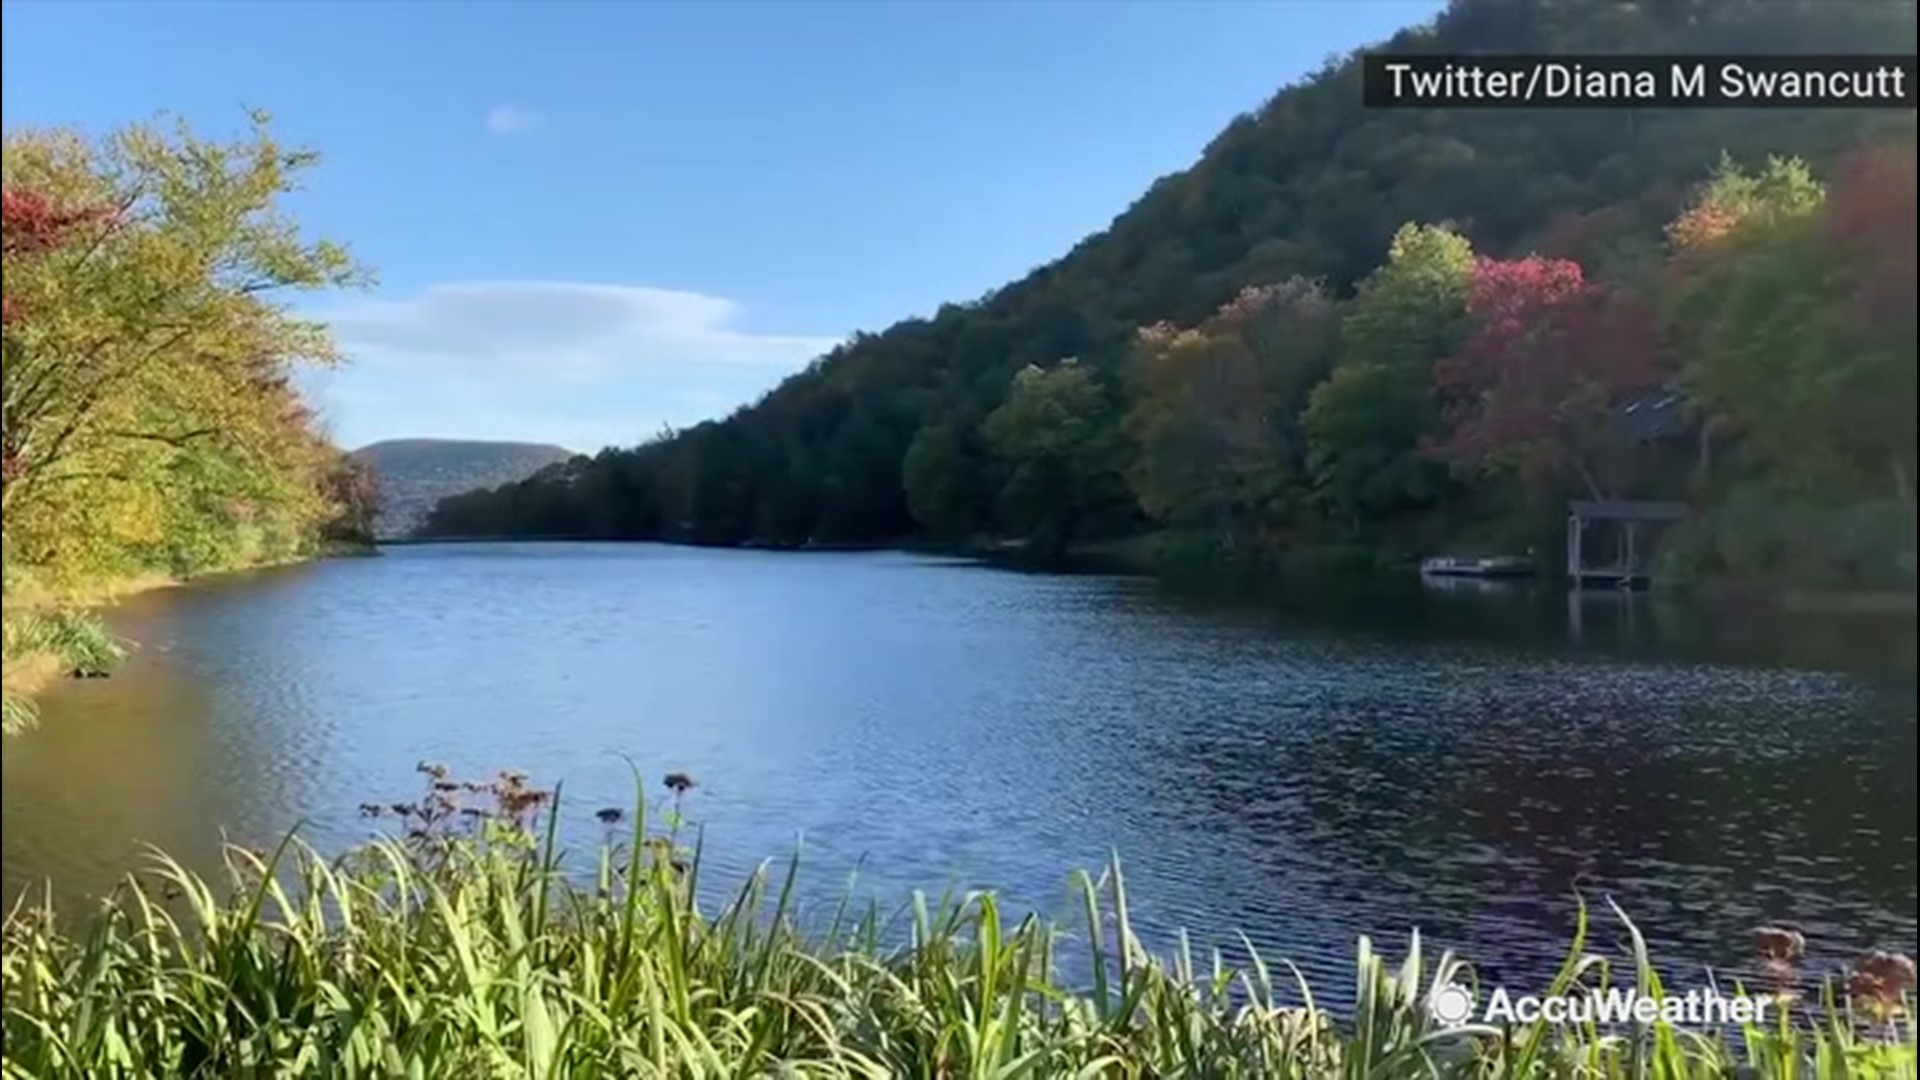 Just take a moment and take in this beautiful, peaceful scene at a lake in Phoenicia, New York, from Oct. 15.